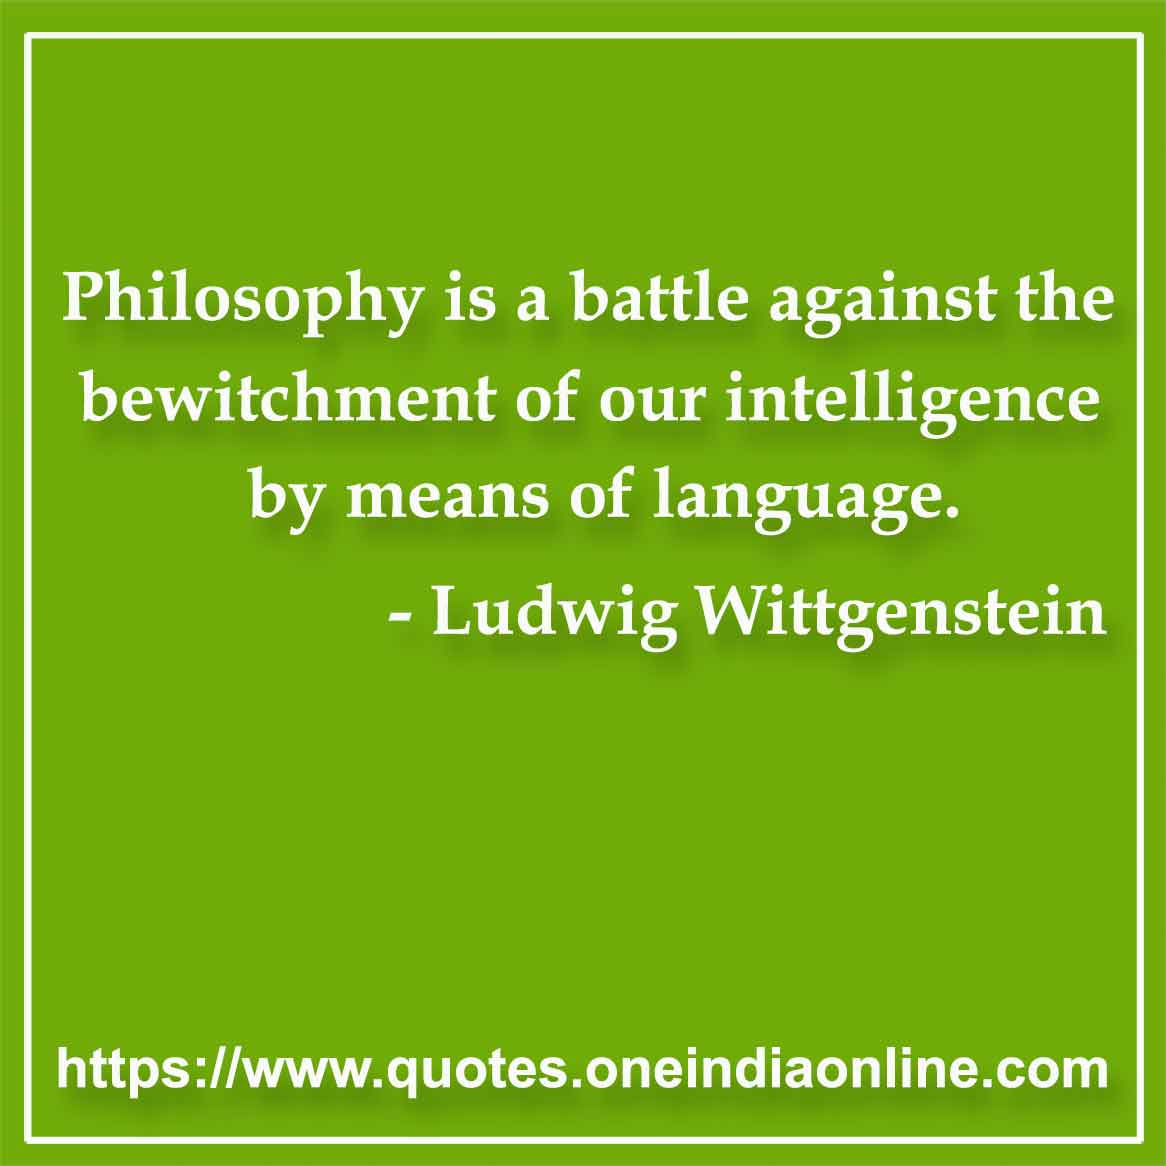 Philosophy is a battle against the bewitchment of our intelligence by means of language.

- Ludwig Wittgenstein Quotes